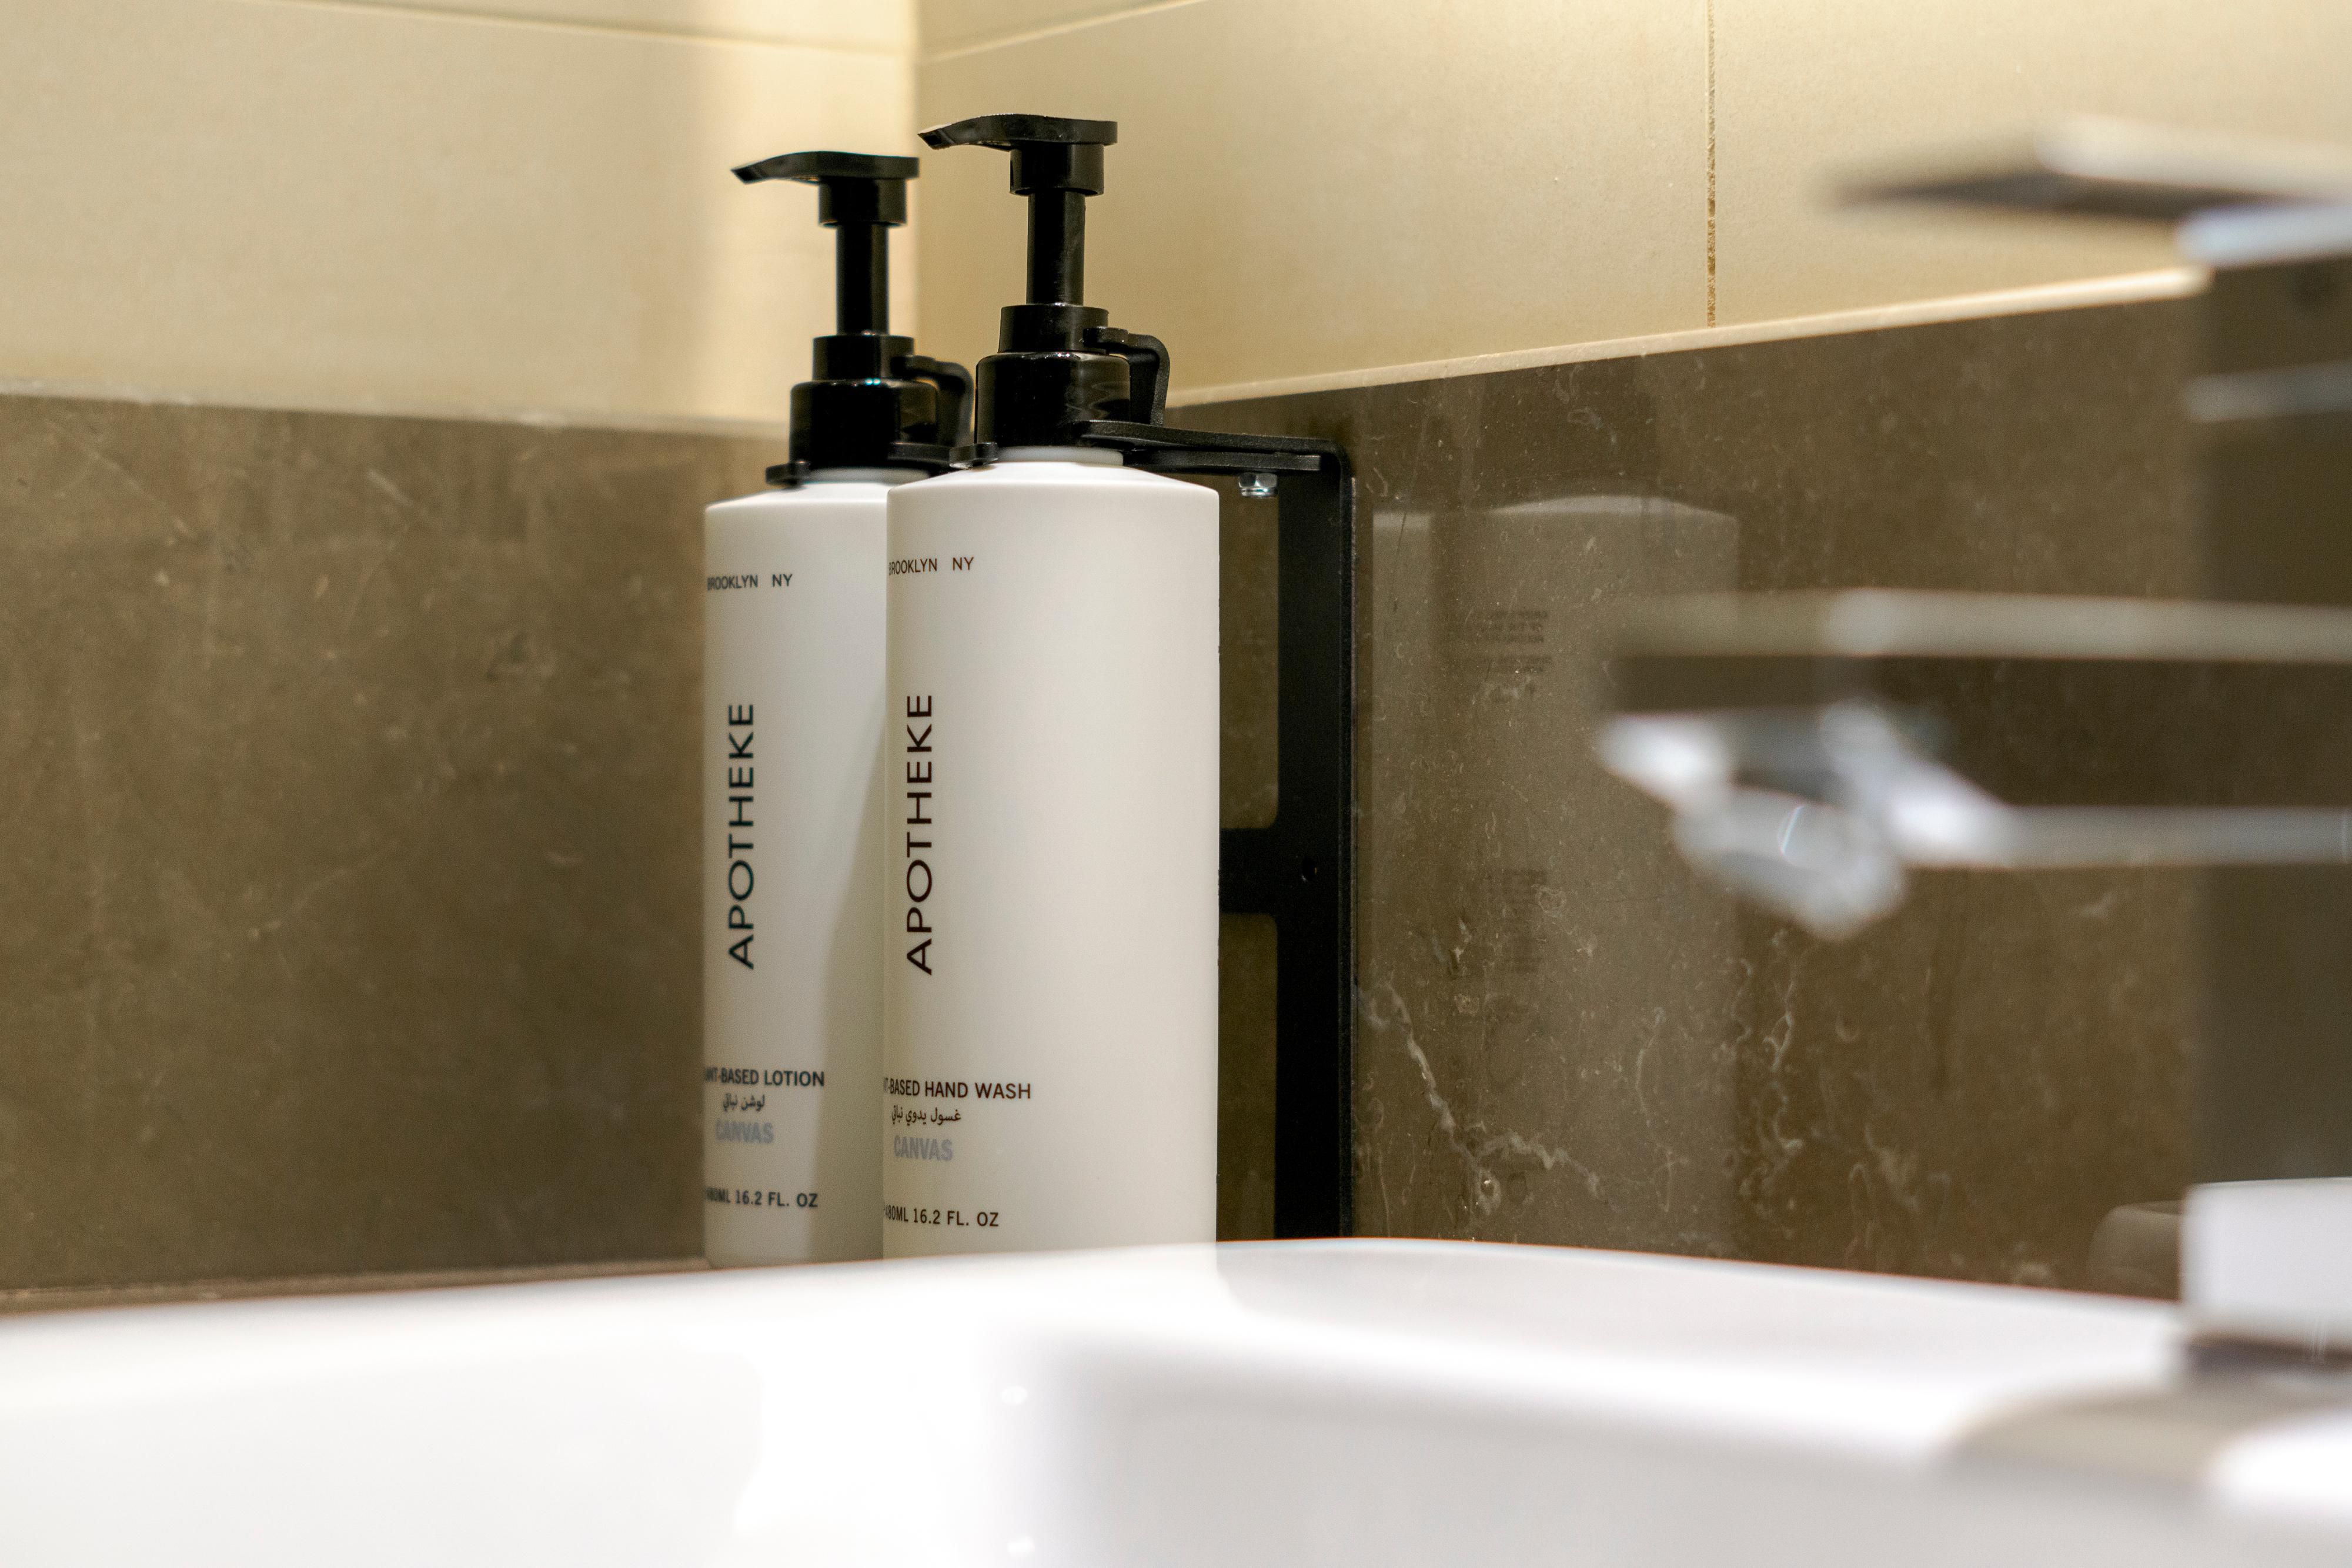 Apotheke hand wash and lotion amenities in every guest room.